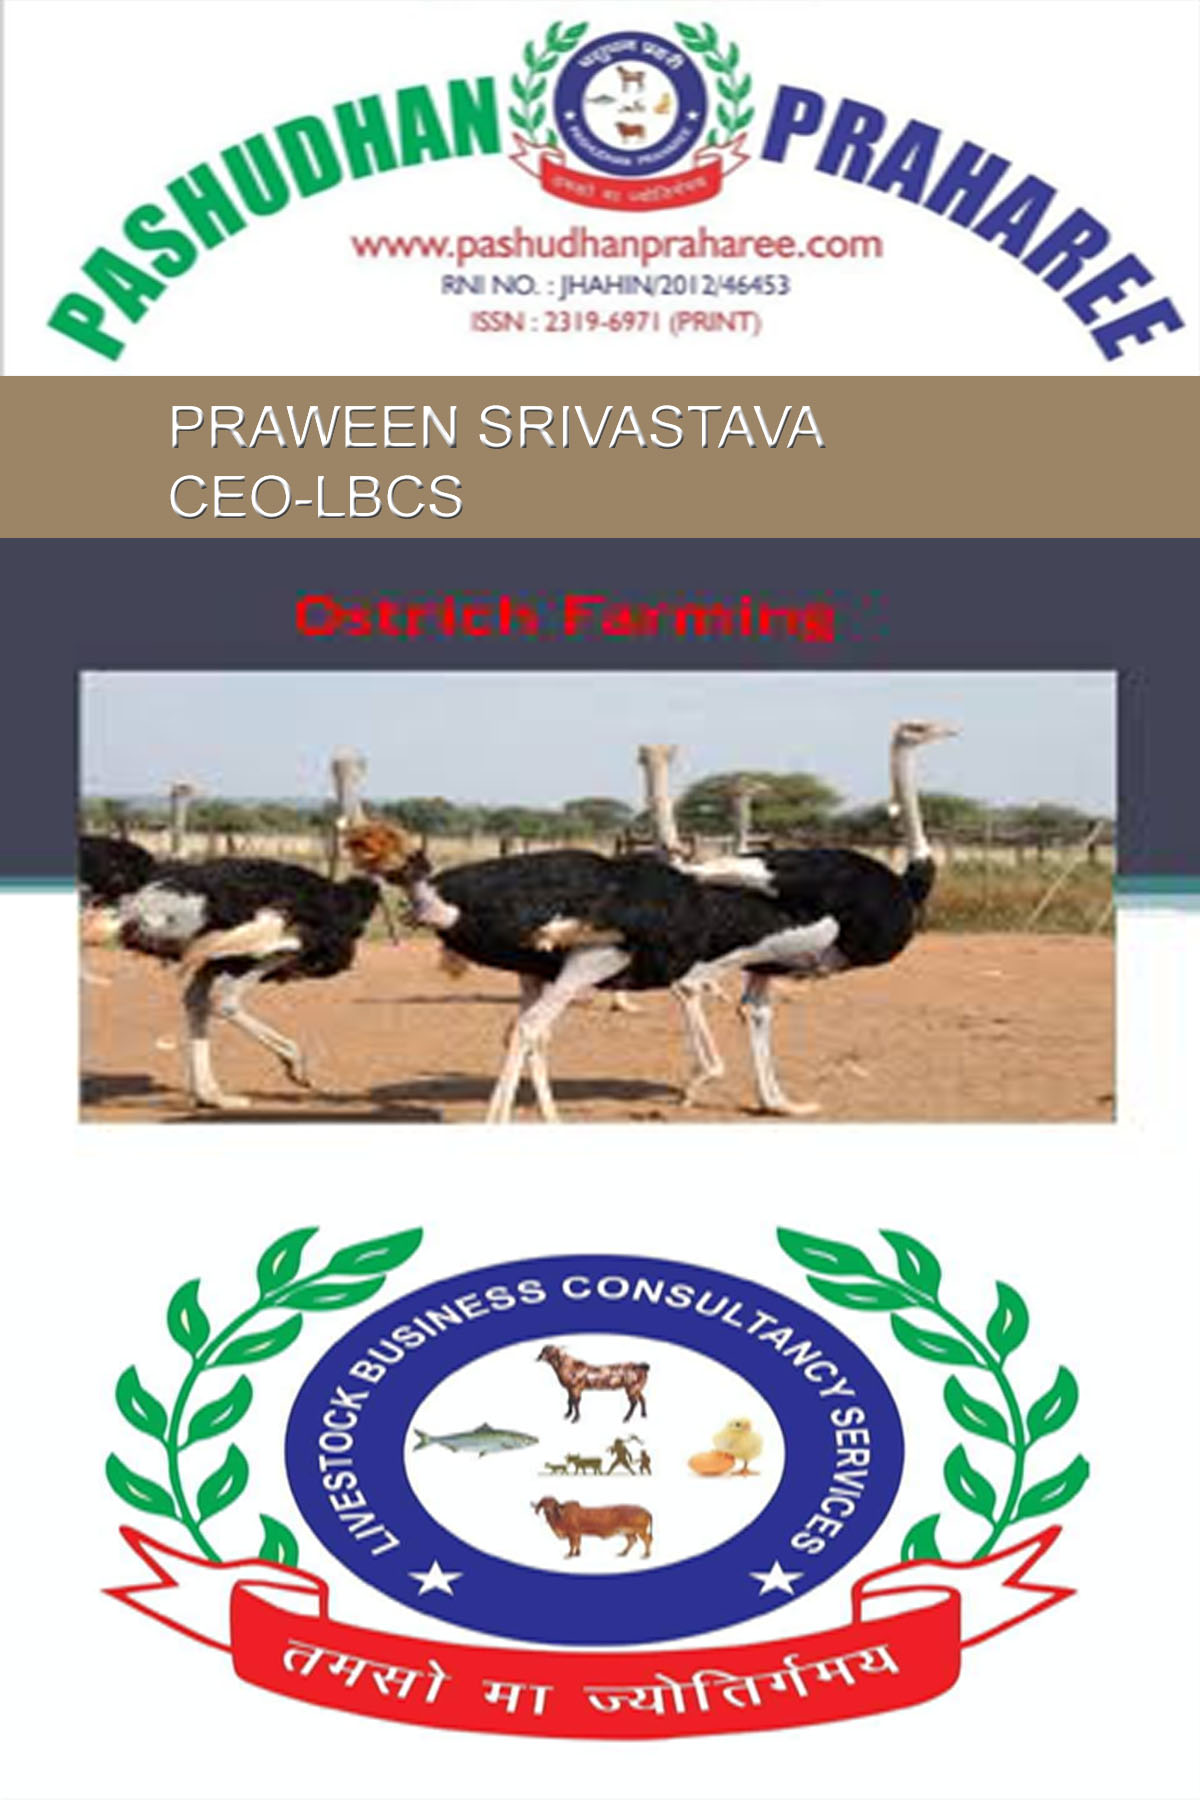 PROSPECTS OF OSTRICH FARMING IN INDIA – Pashudhan praharee